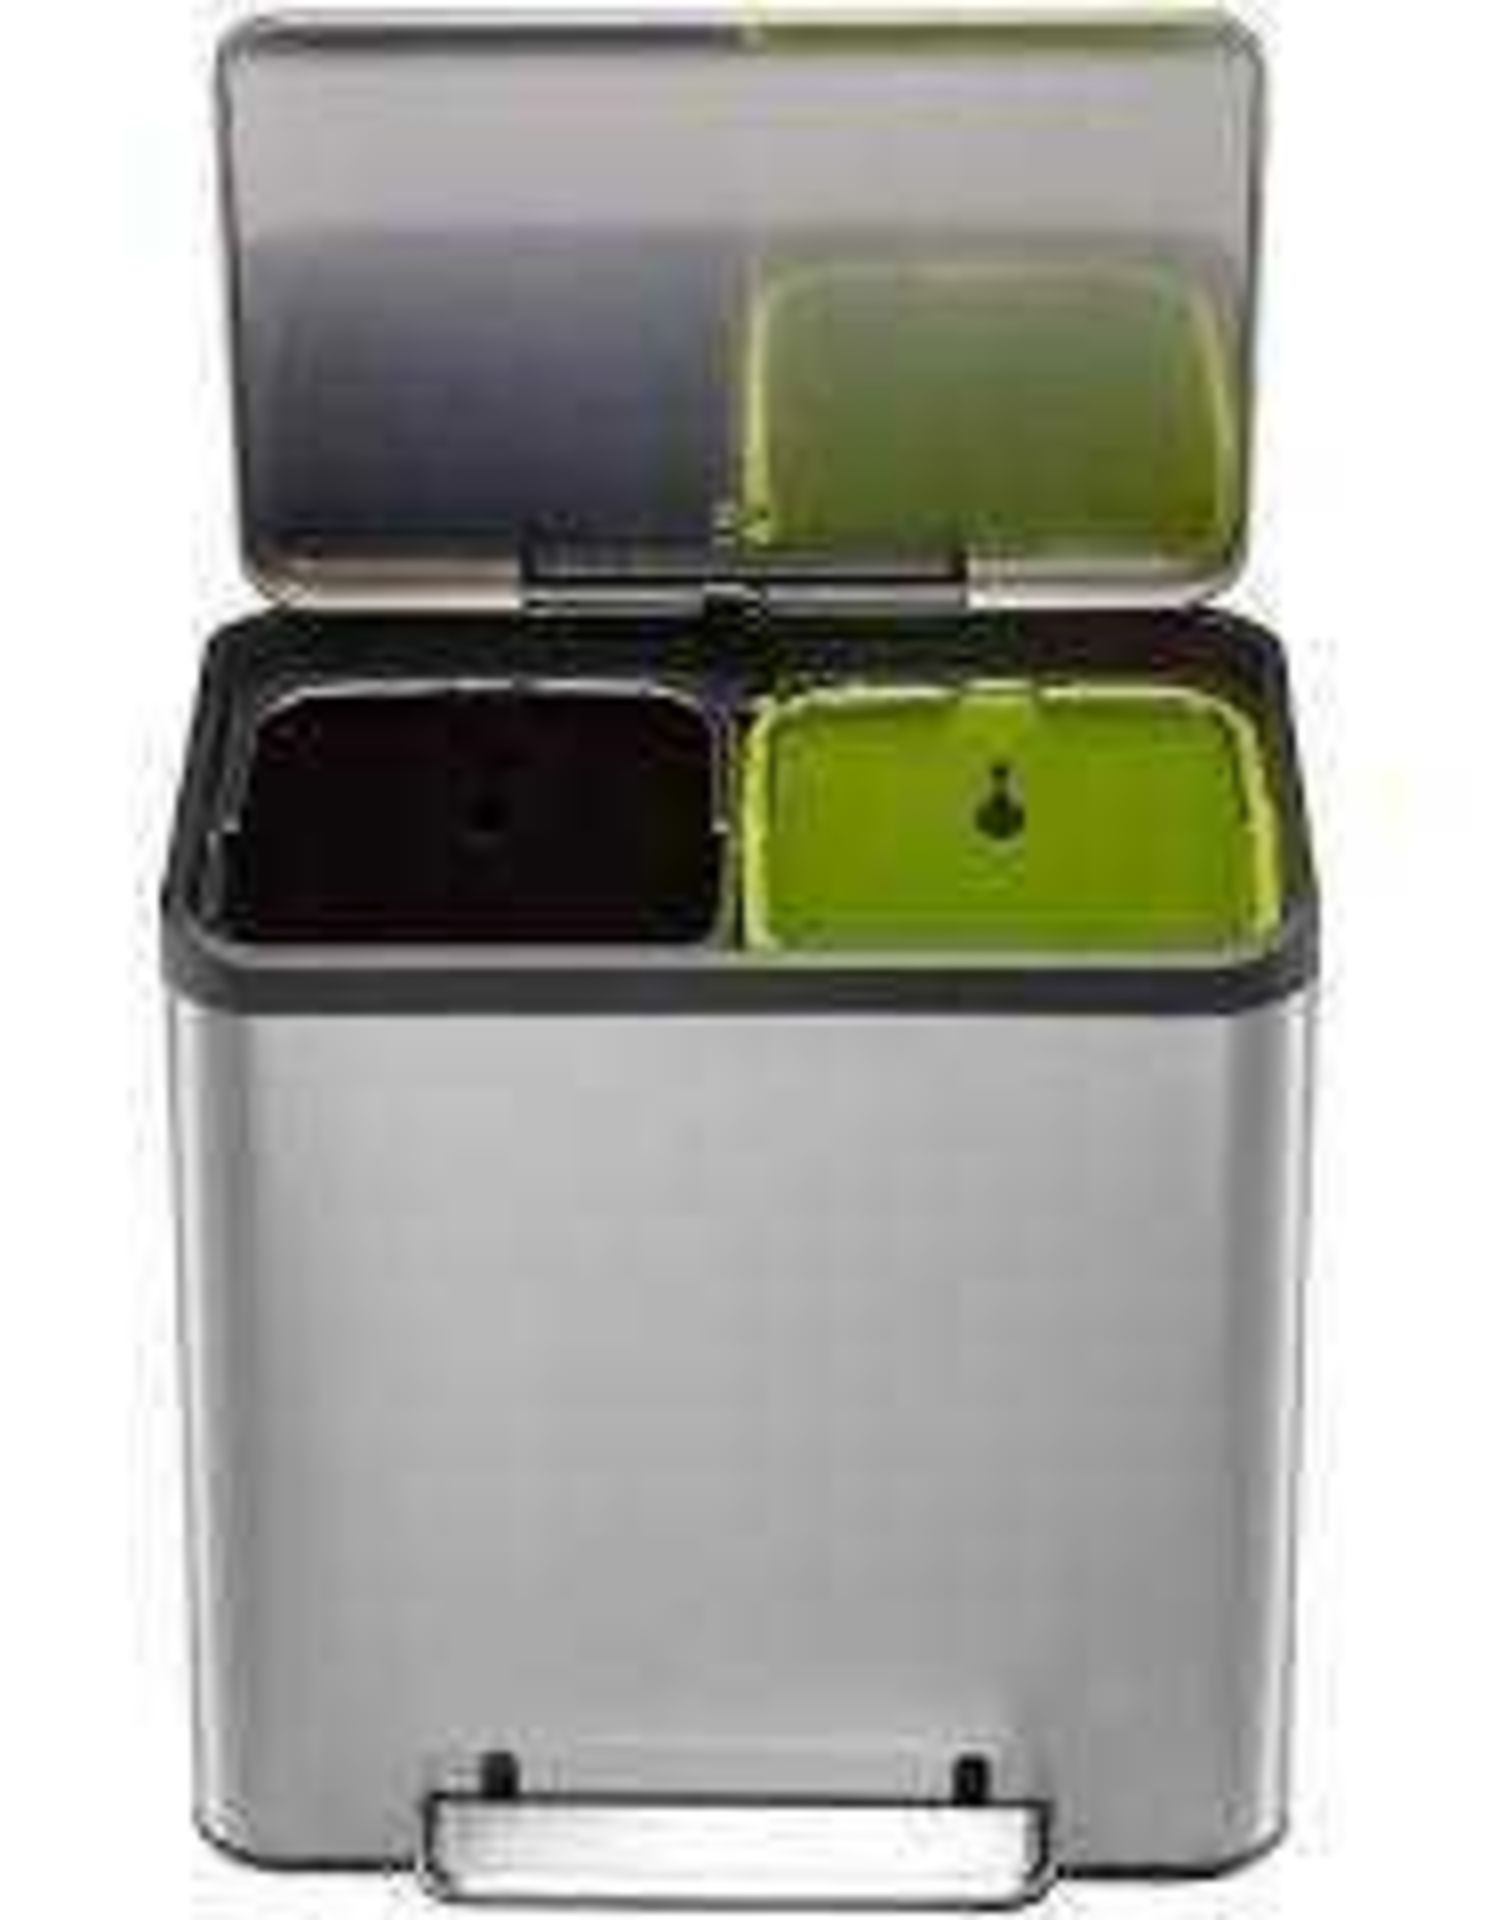 RRP £140 Eko X Cube Pedal Bin 322546 (Appraisals Available On Request) (Pictures For Illustration